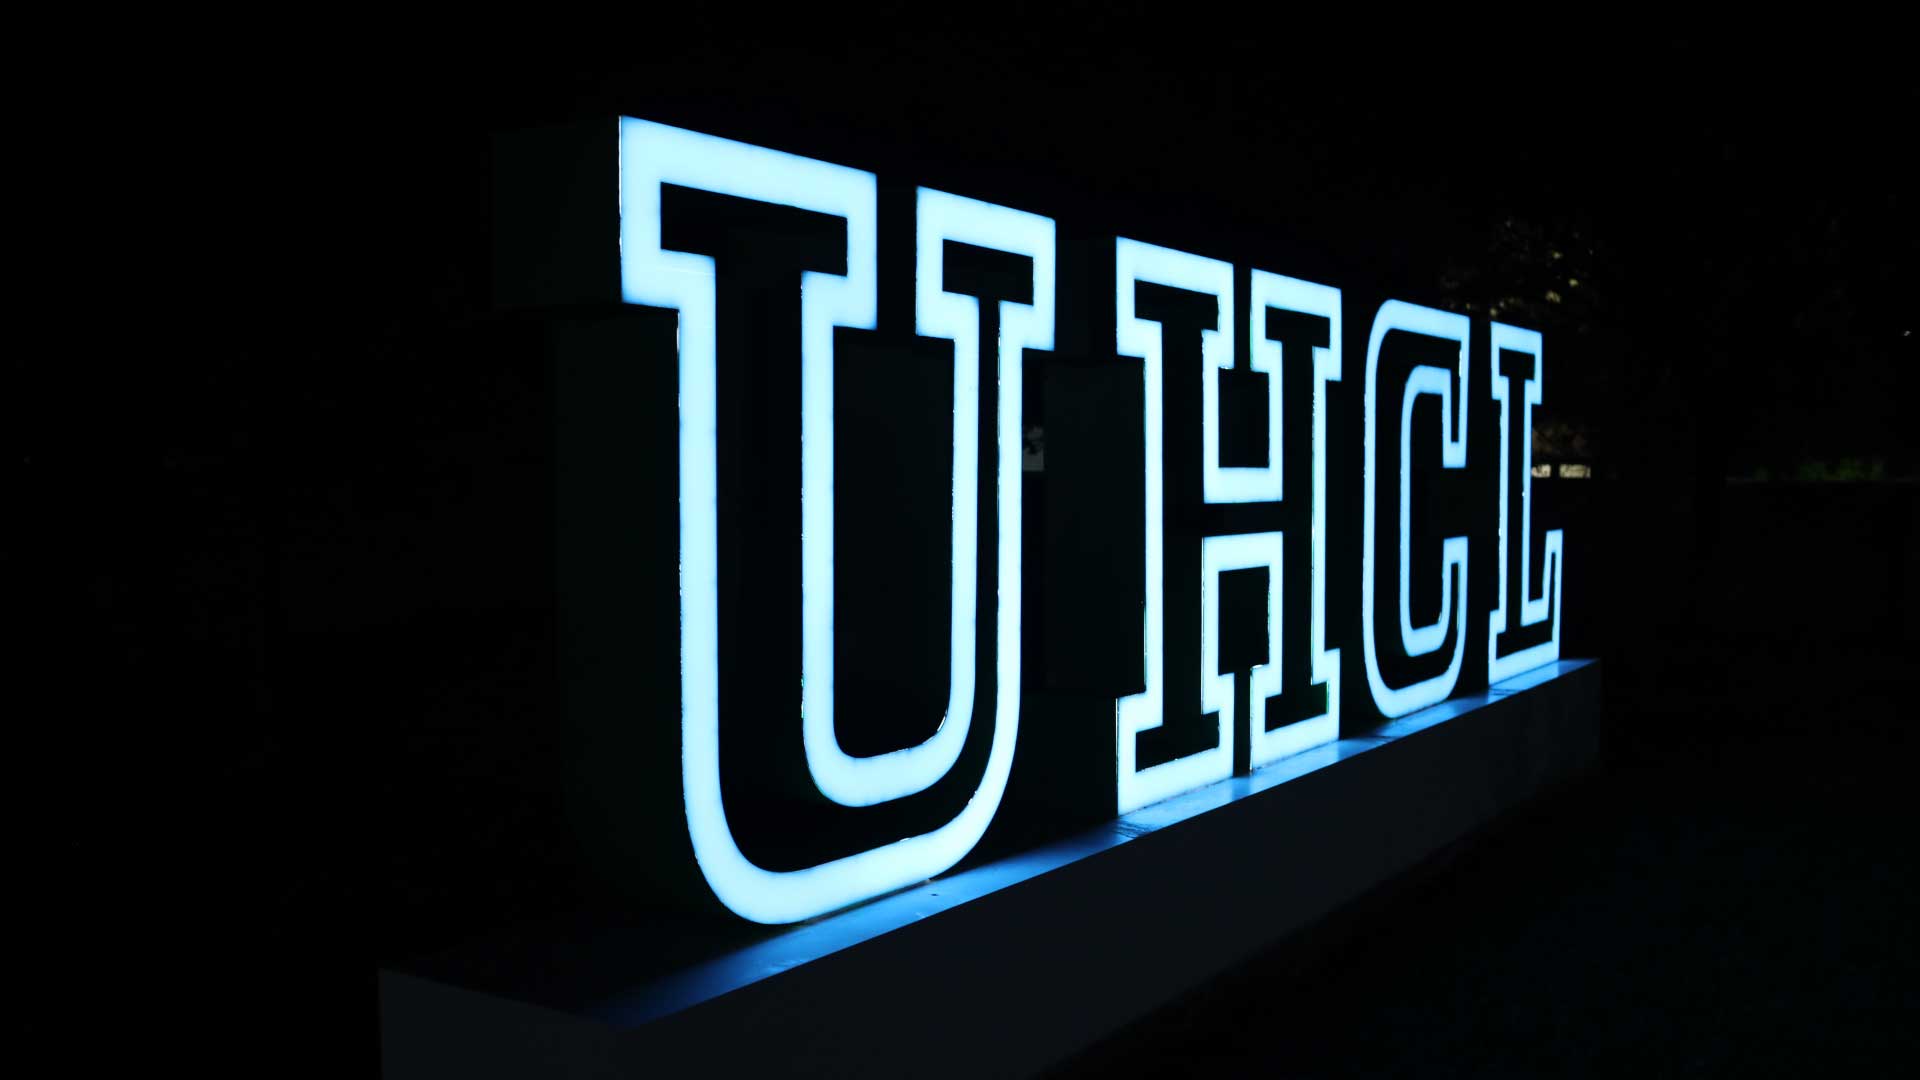 UHCL letters lit up at night